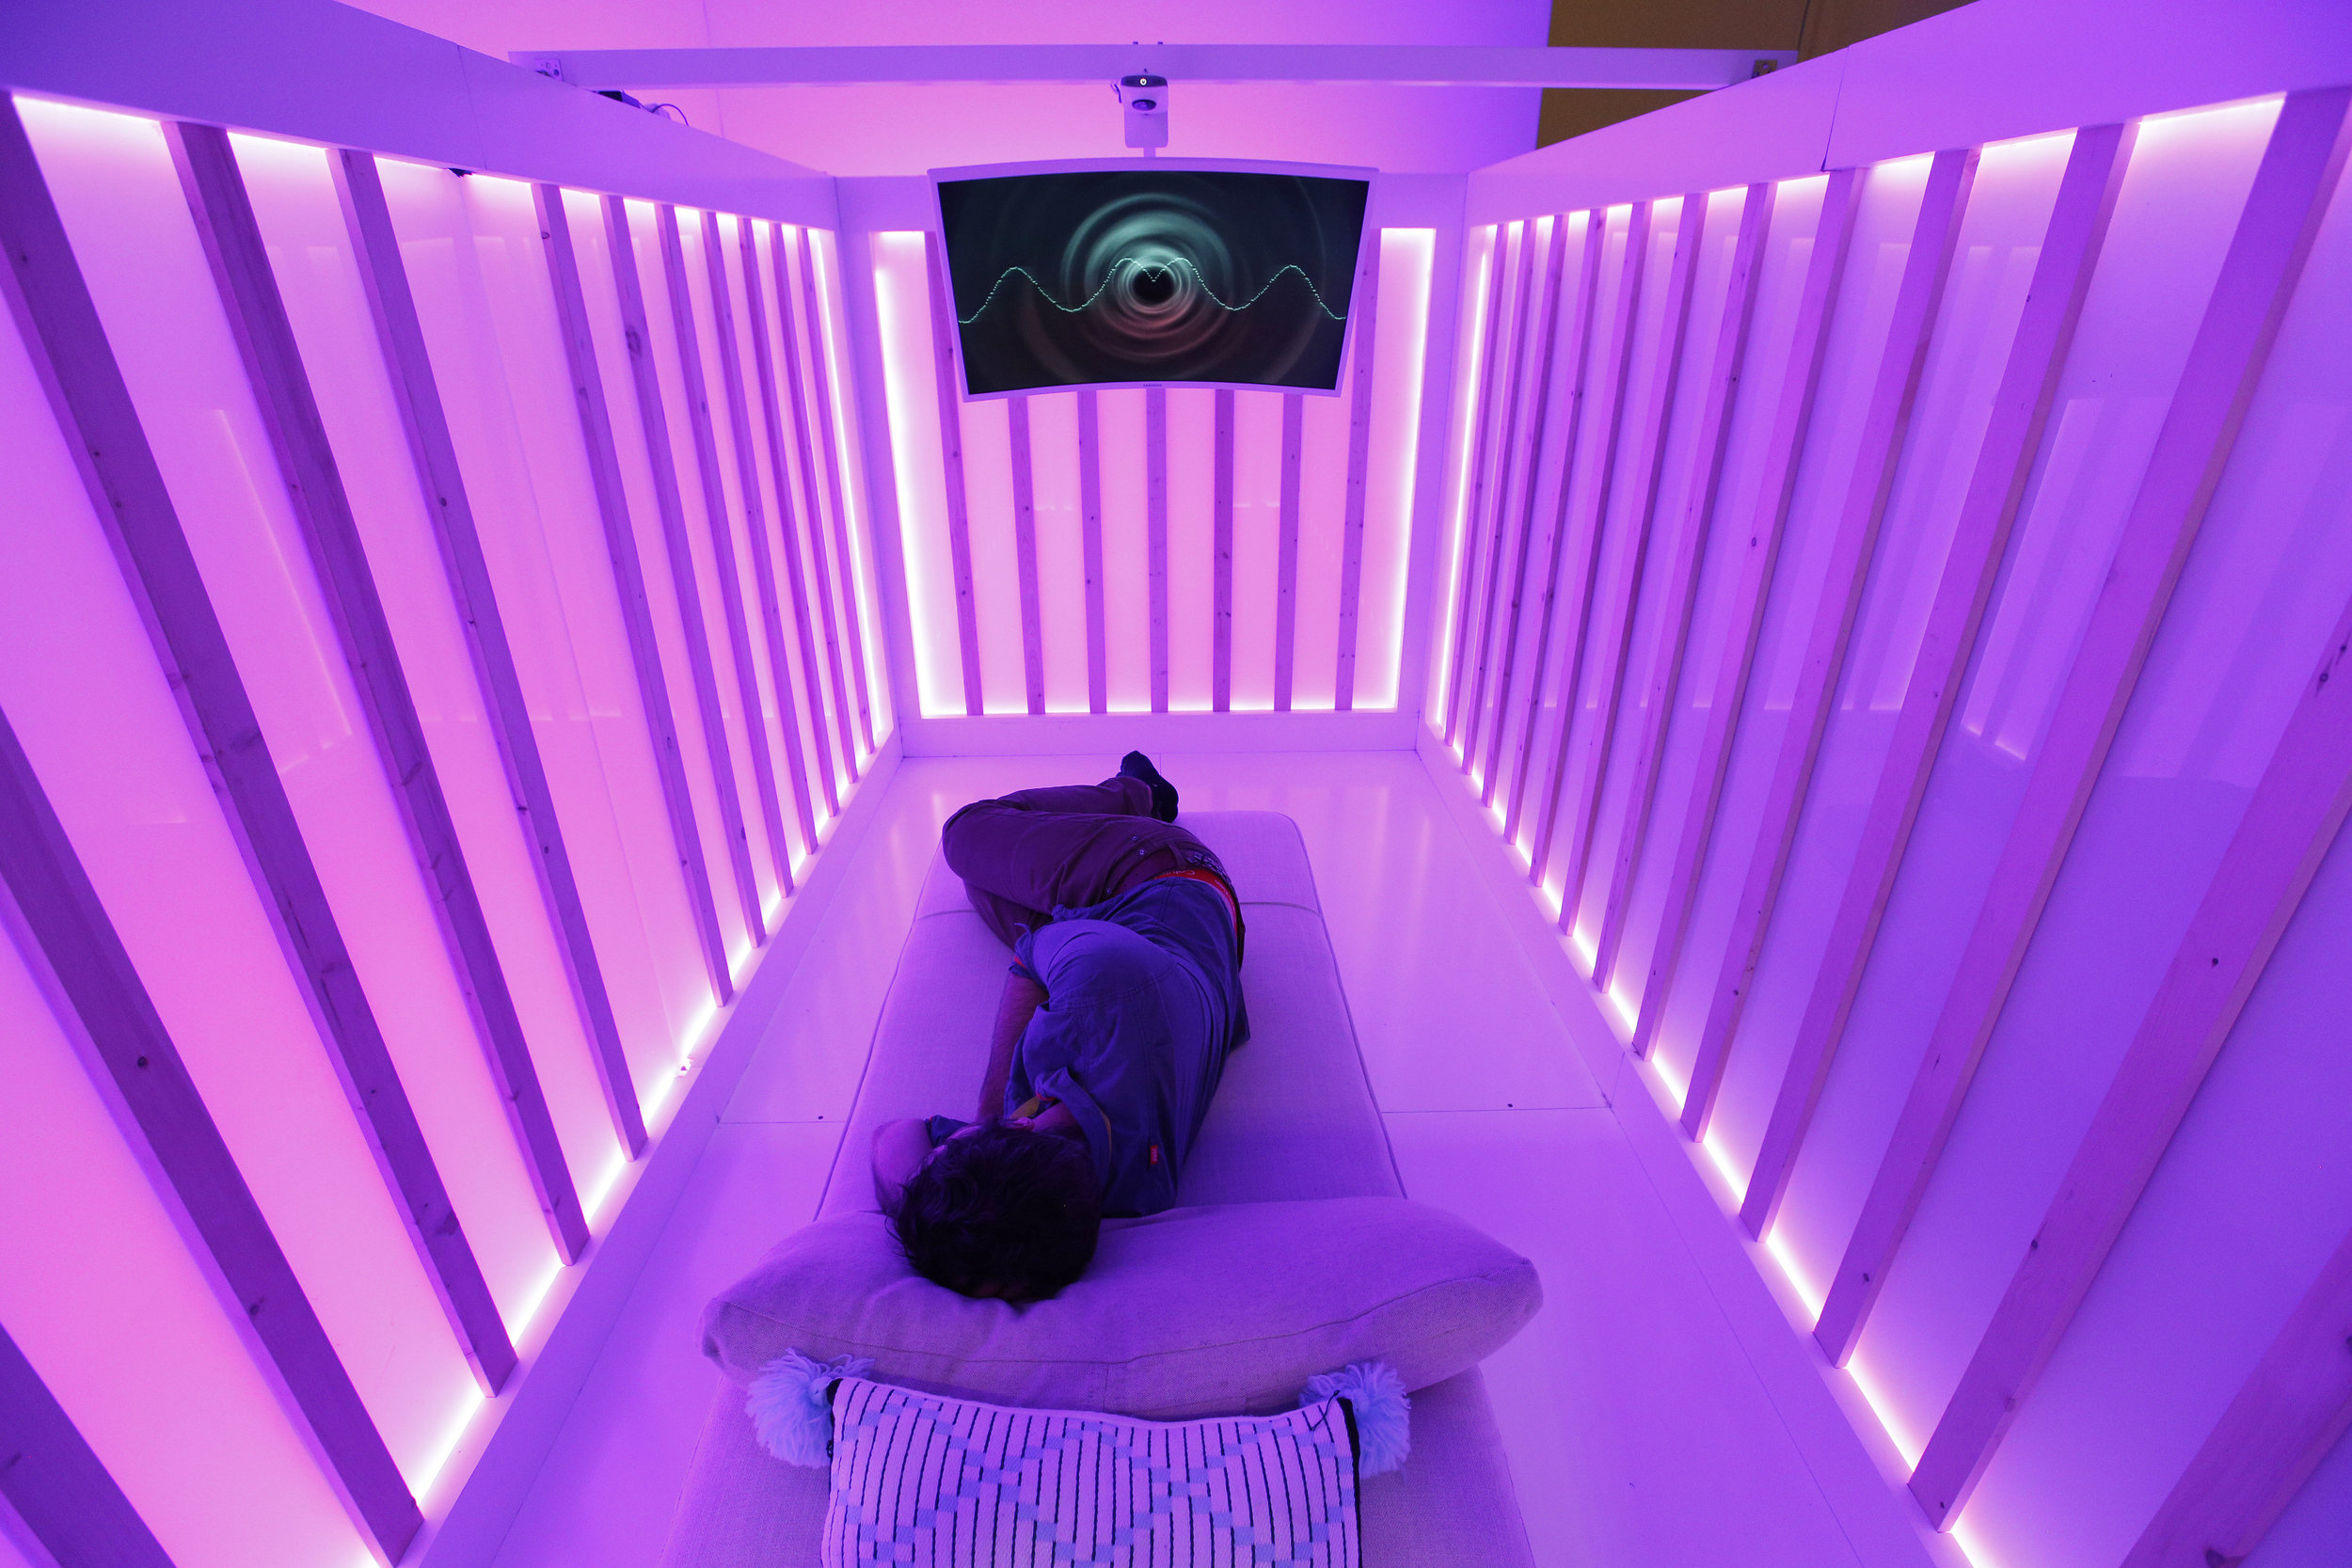 An attendee tests the Miku baby sleep and breathing monitor at the Miku  booth at CES International, Wednesday, Jan. 9, 2019, in Las Vegas. (AP  Photo/John Locher)